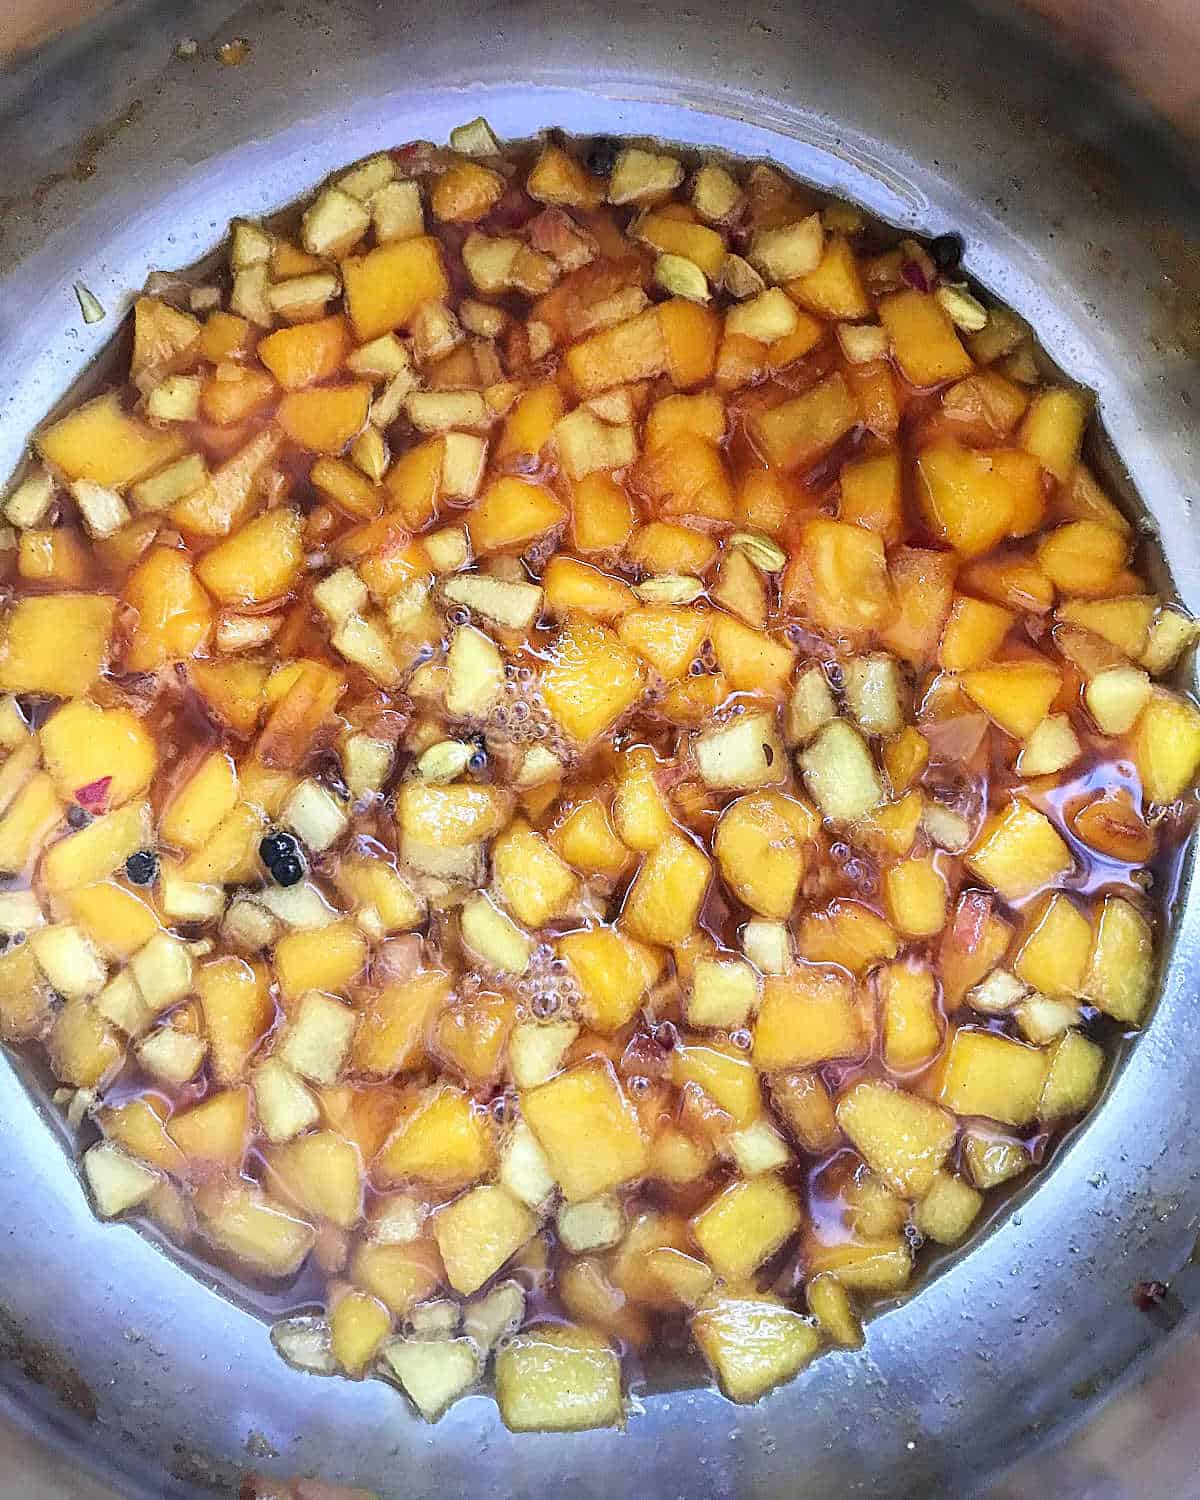 Ingredients for peach chutney in a metal saucepan, view from above.